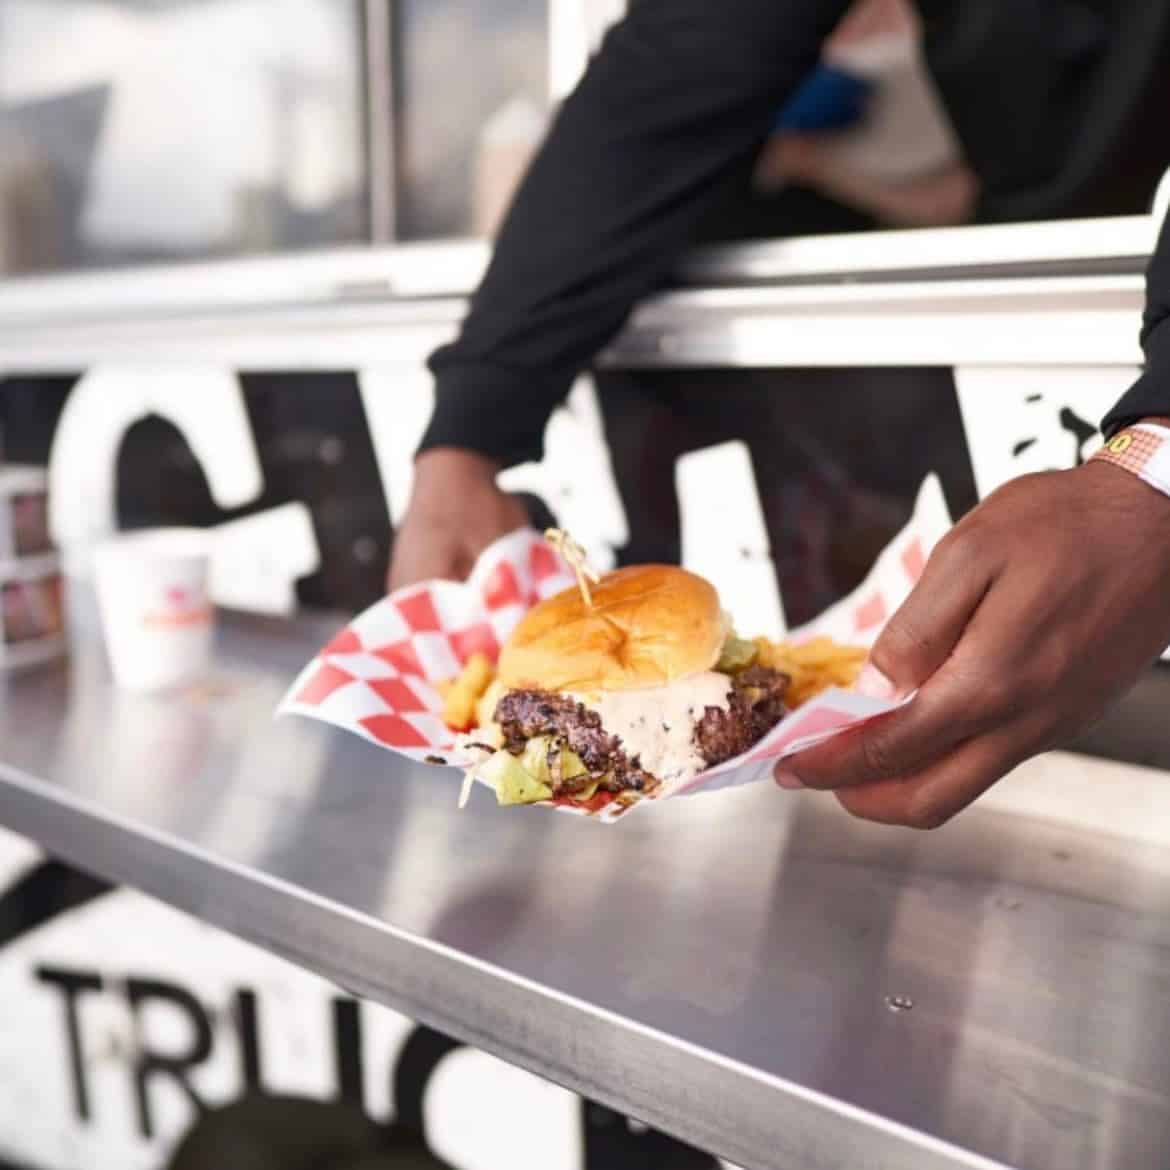 Burger being served from food truck